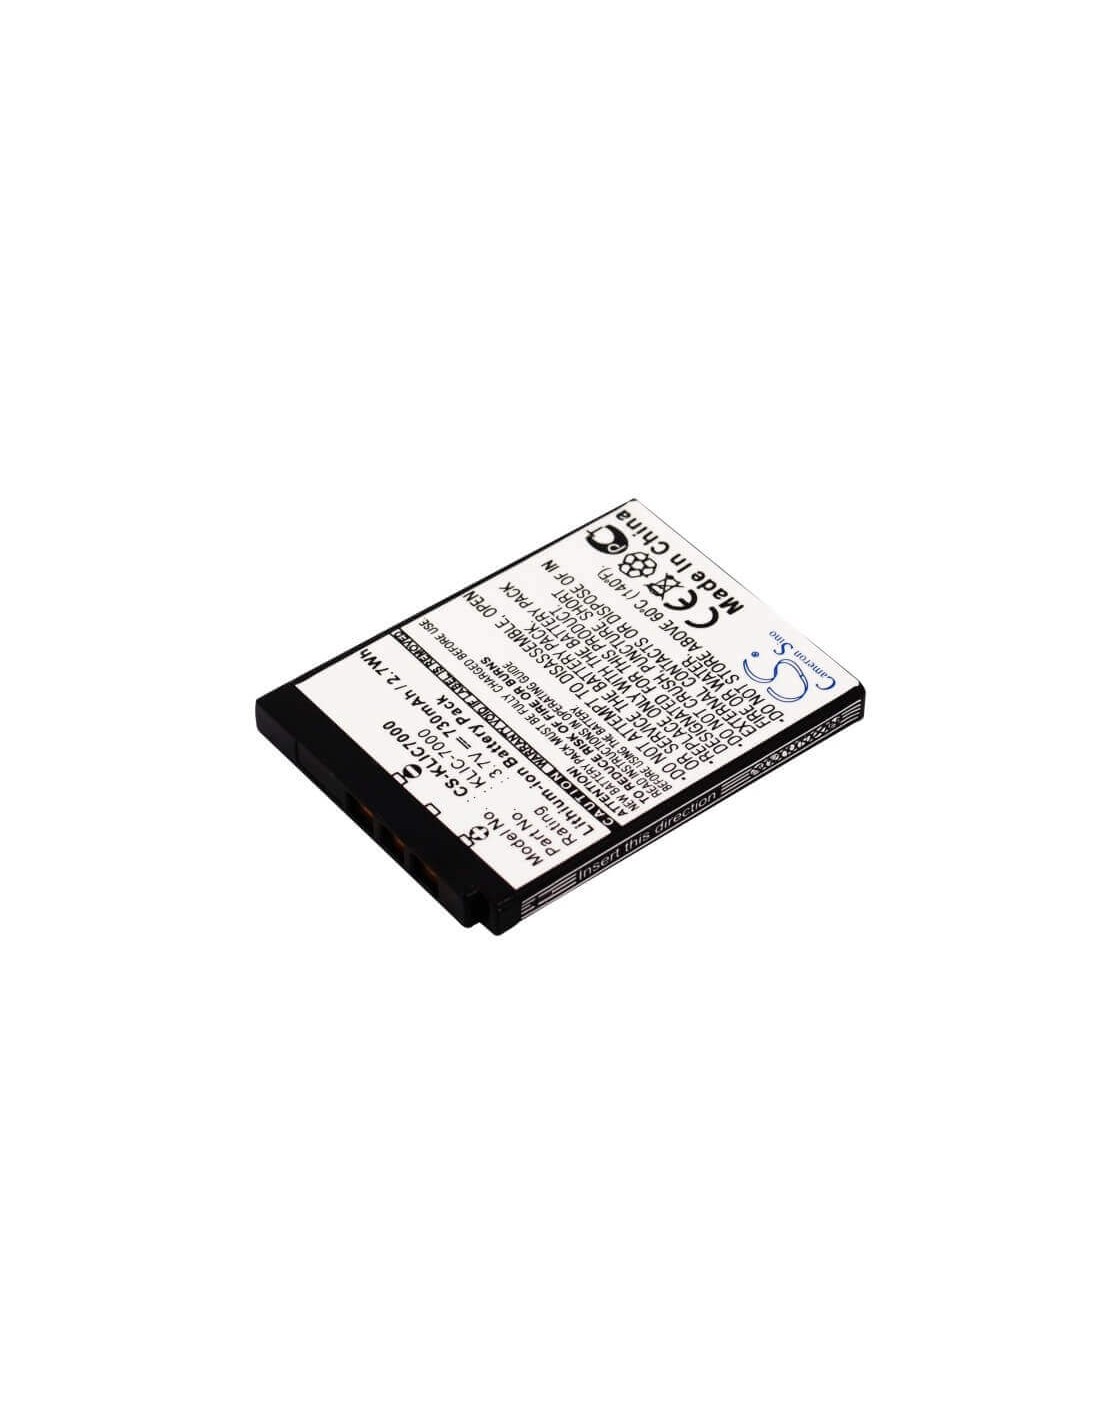 Battery for Rollei Cl200, Cl-200, Compactline 200, 3.7V, 730mAh - 2.70Wh